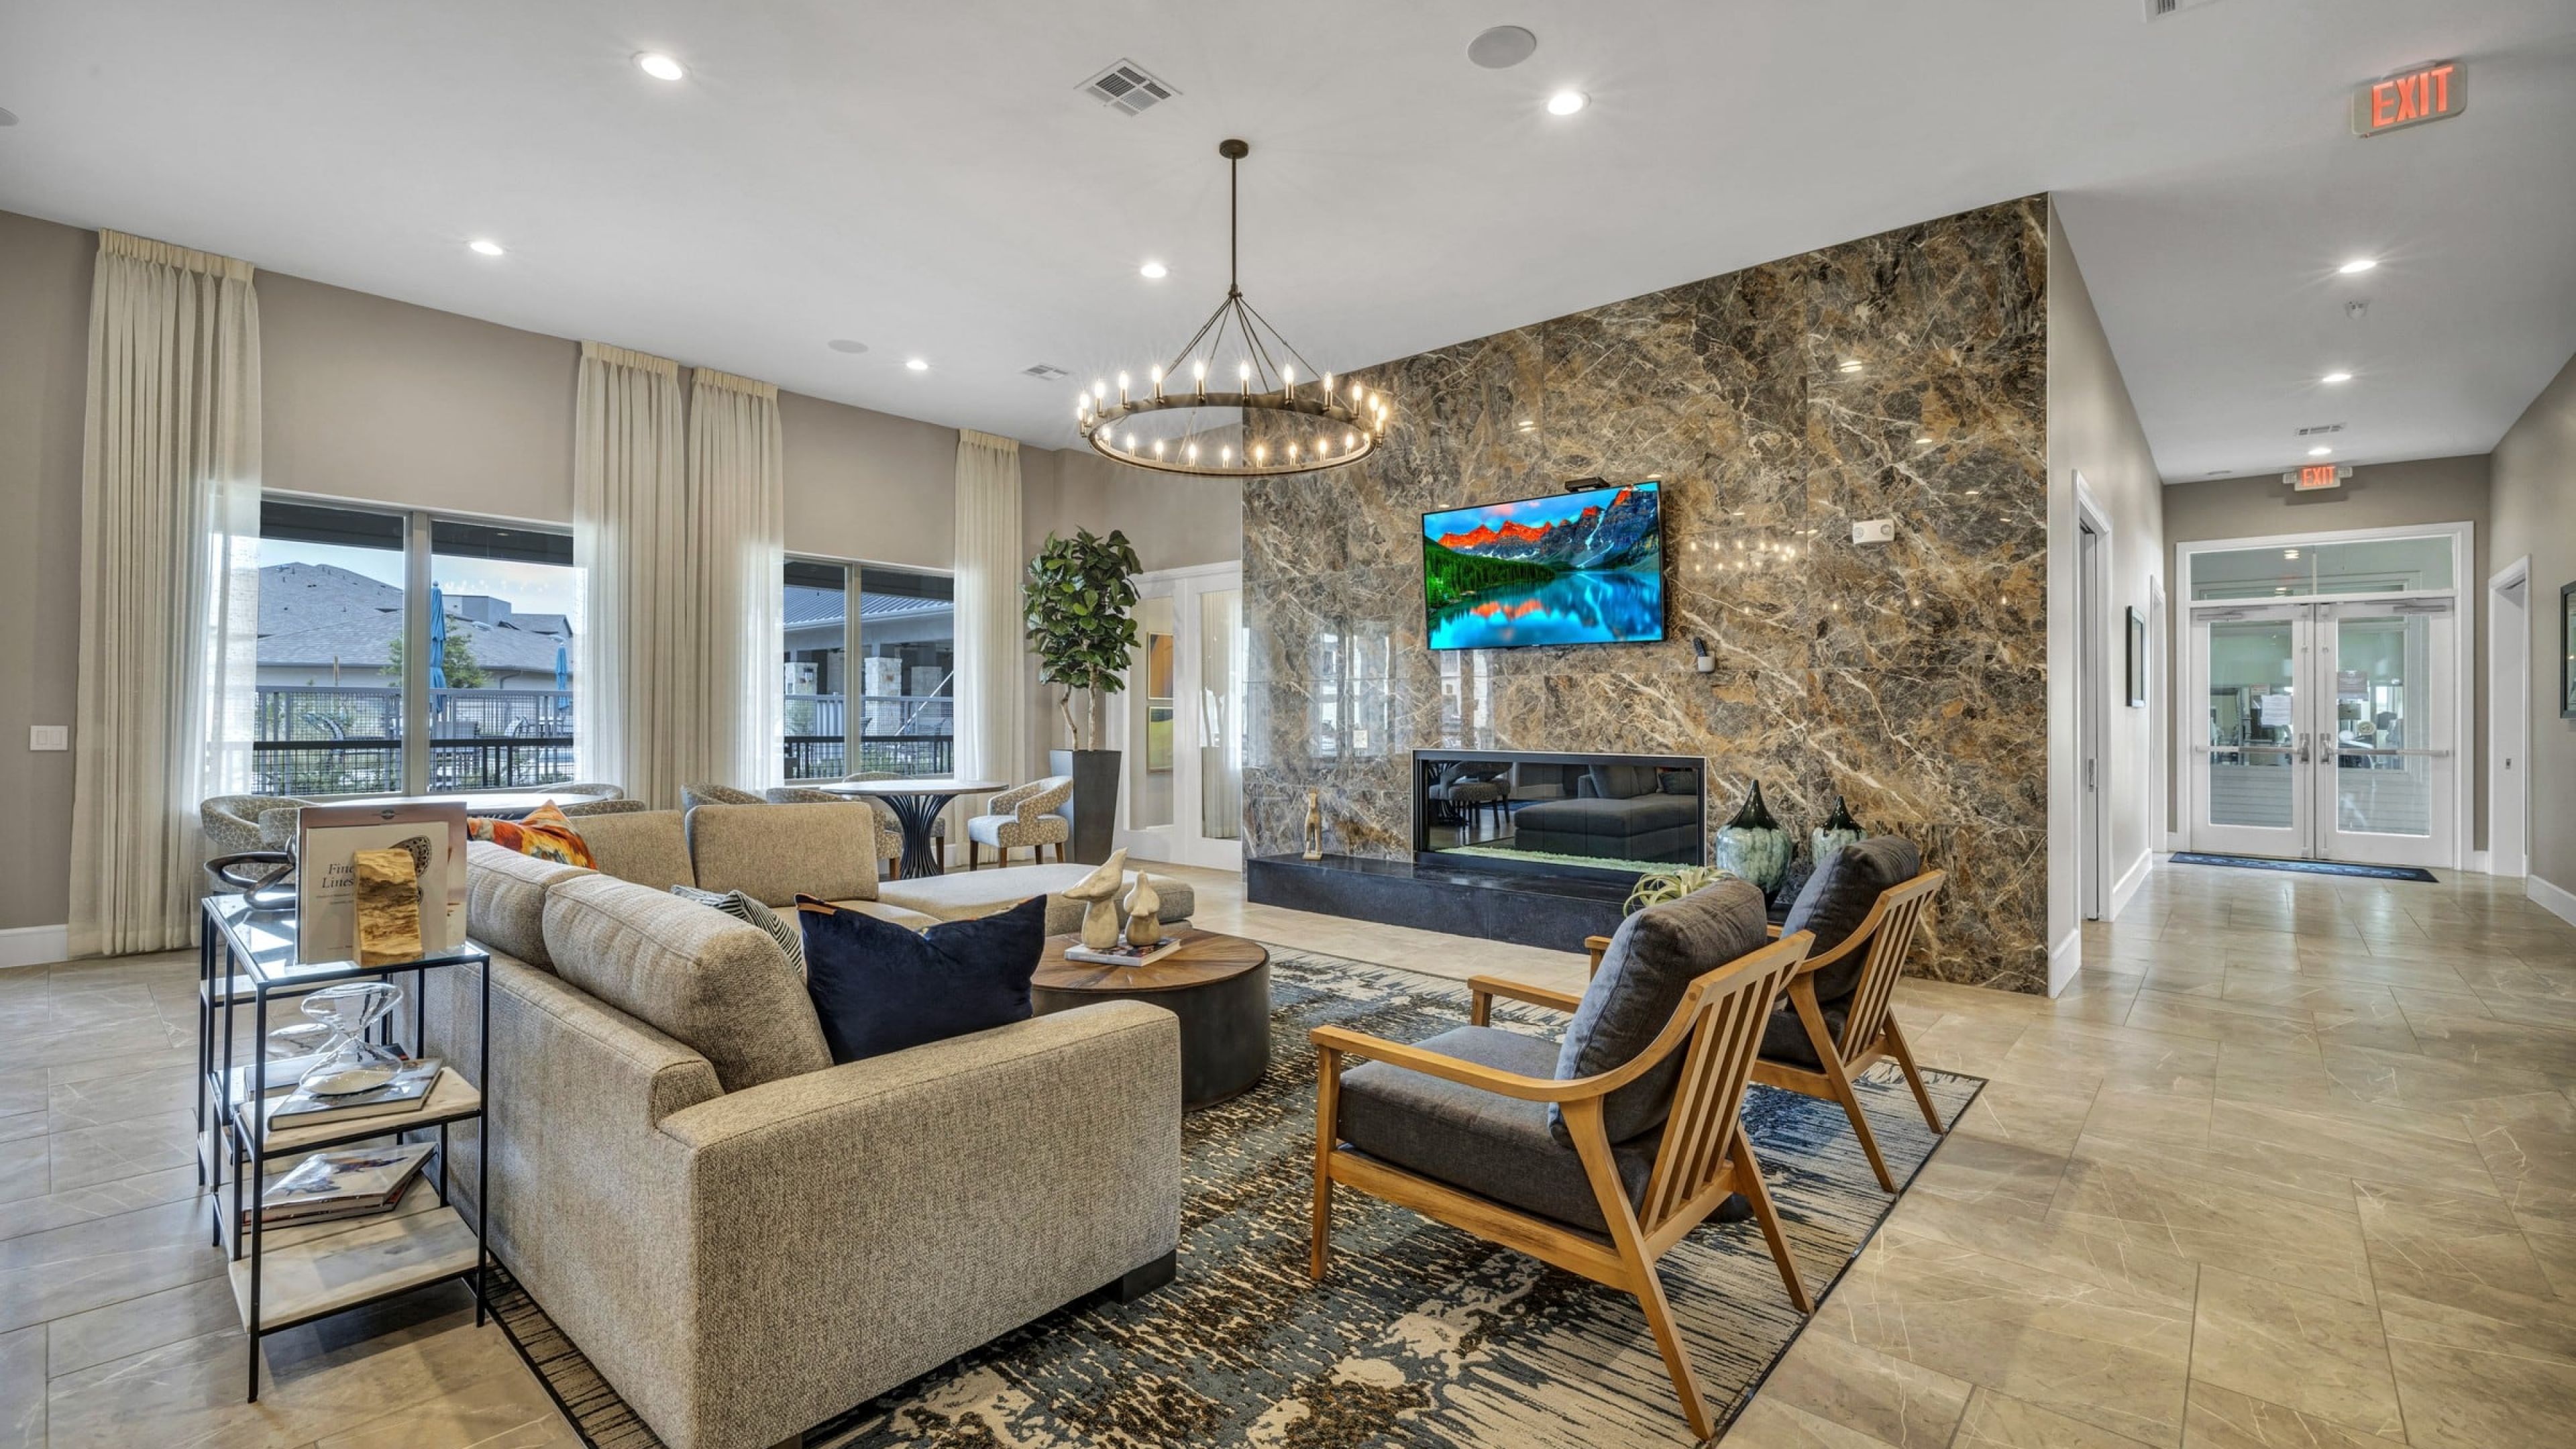 Hawthorne at Blanco Riverwalk resident clubhouse amenity with seating area, indoor fireplace, and beautiful finishes